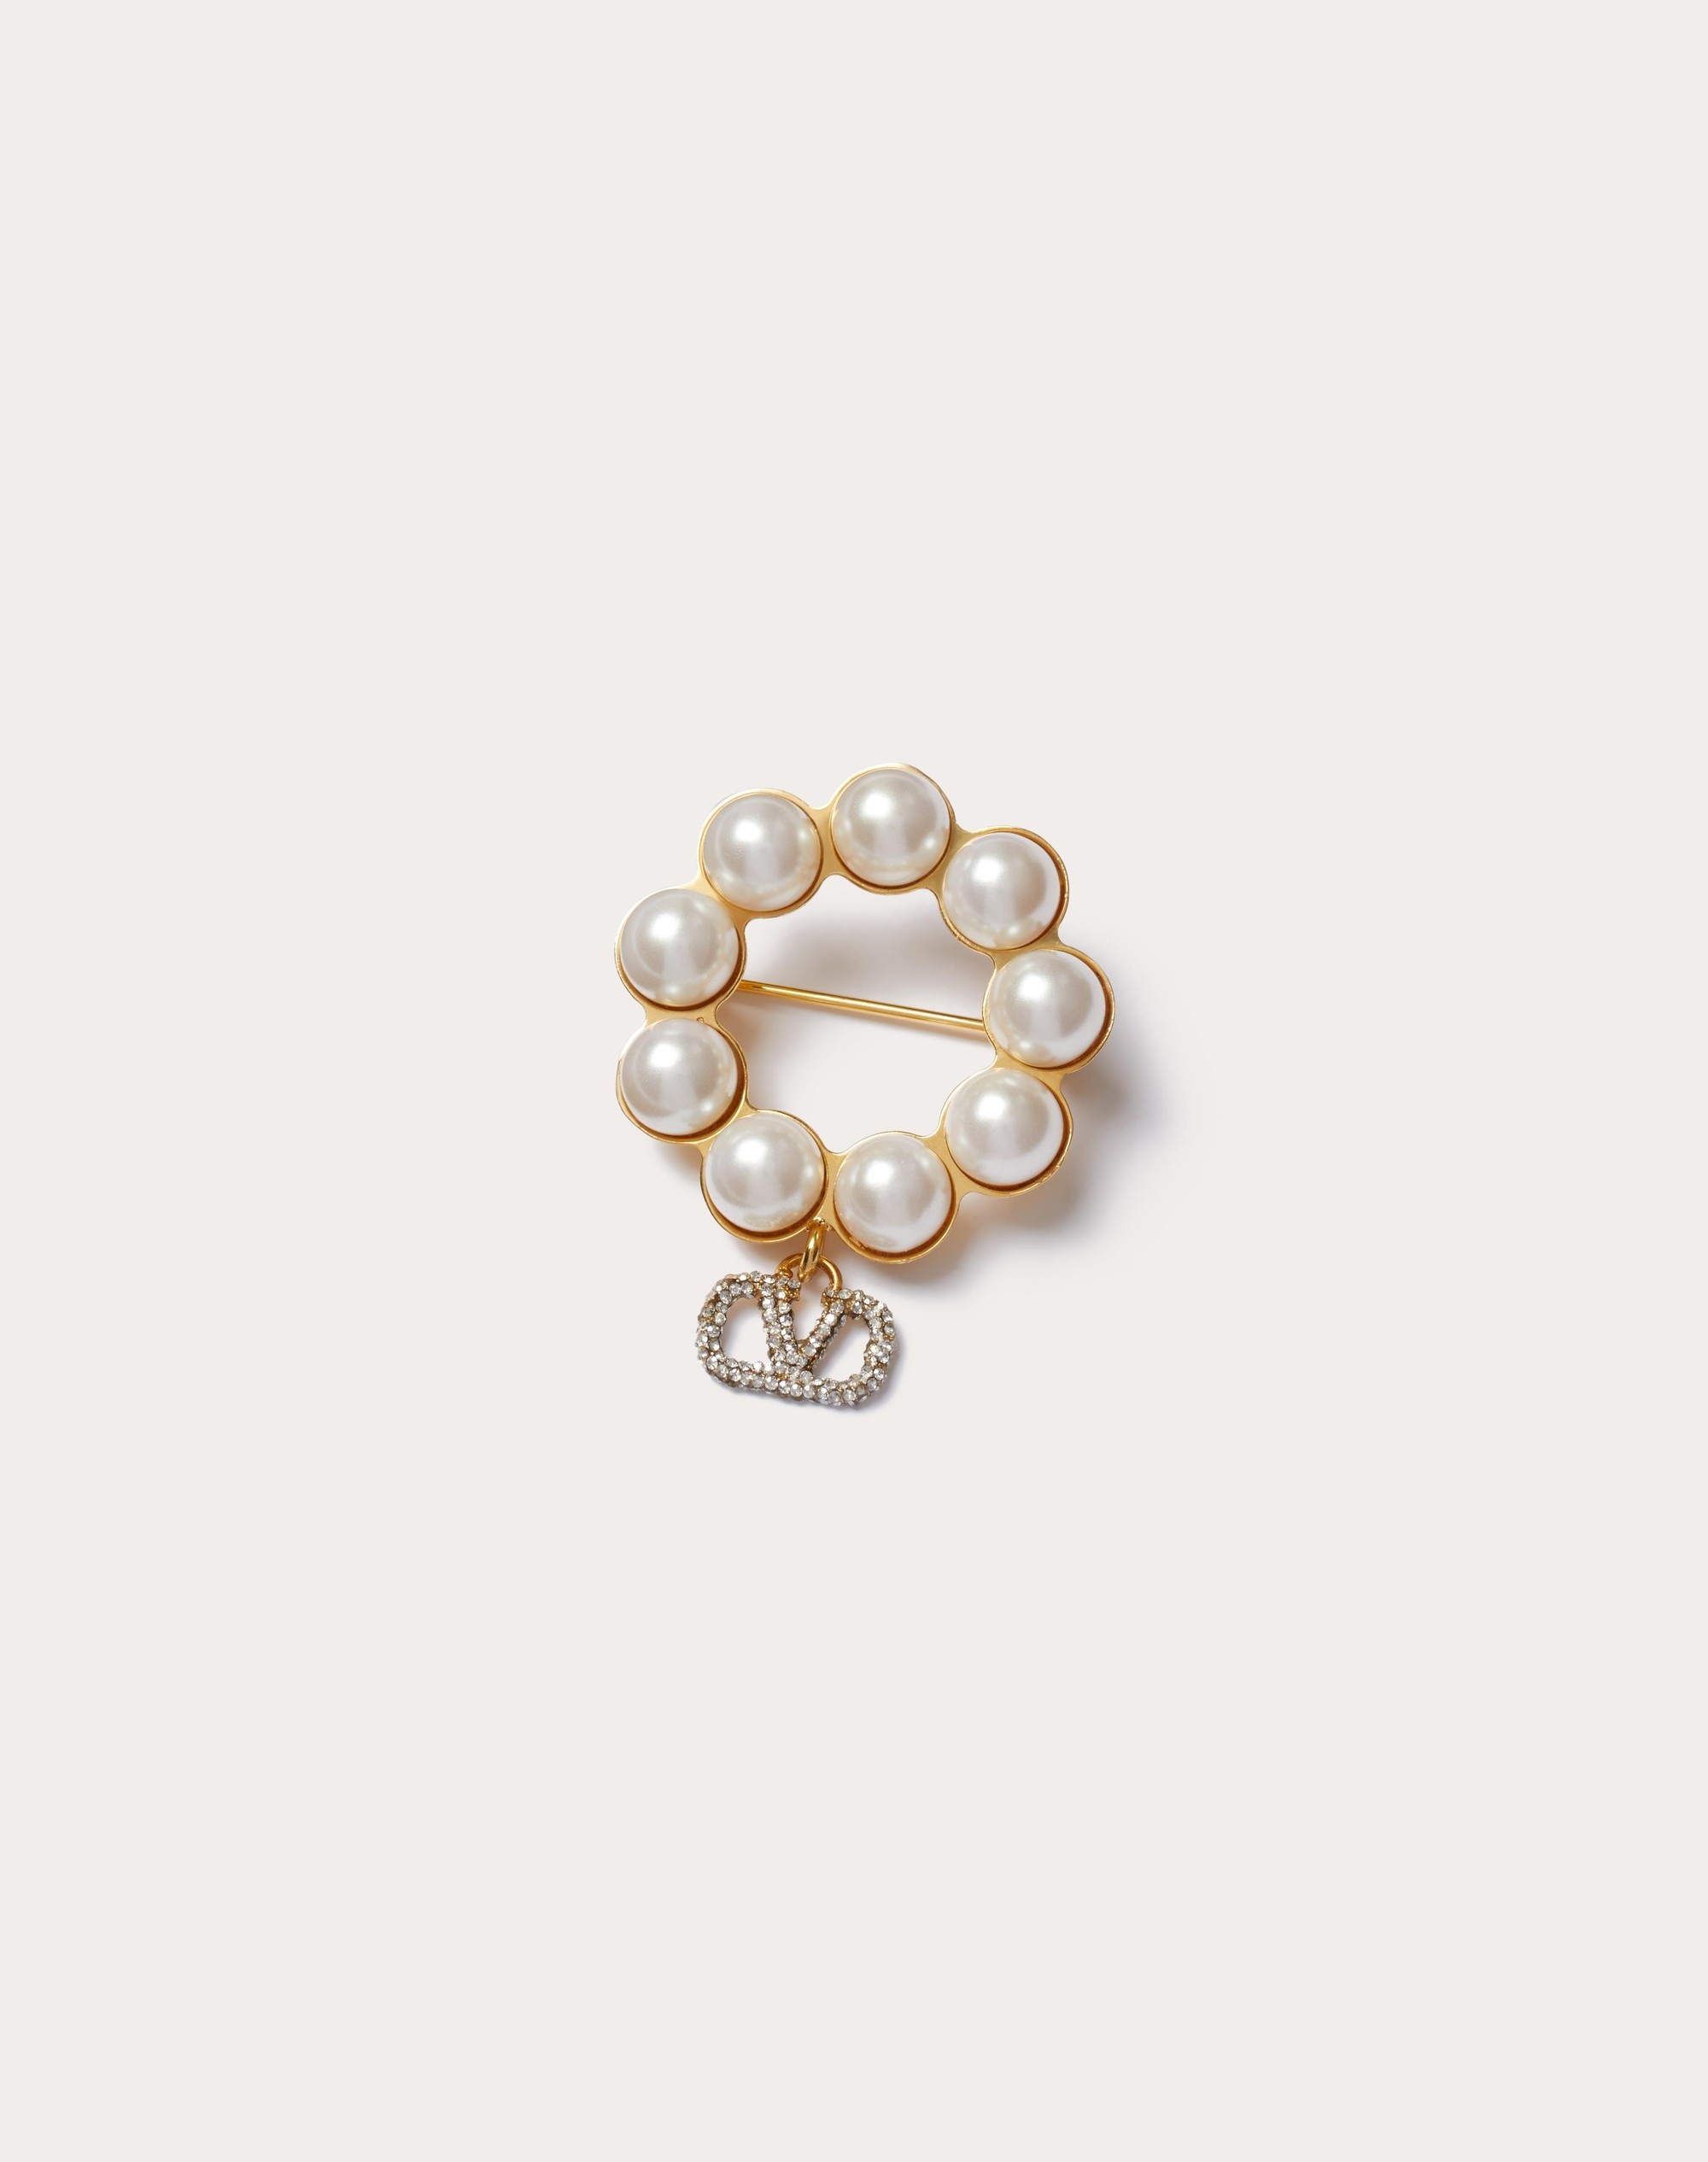 VLOGO SIGNATURE METAL BROOCH WITH SWAROVSKI® CRYSTALS AND PEARLS - 1